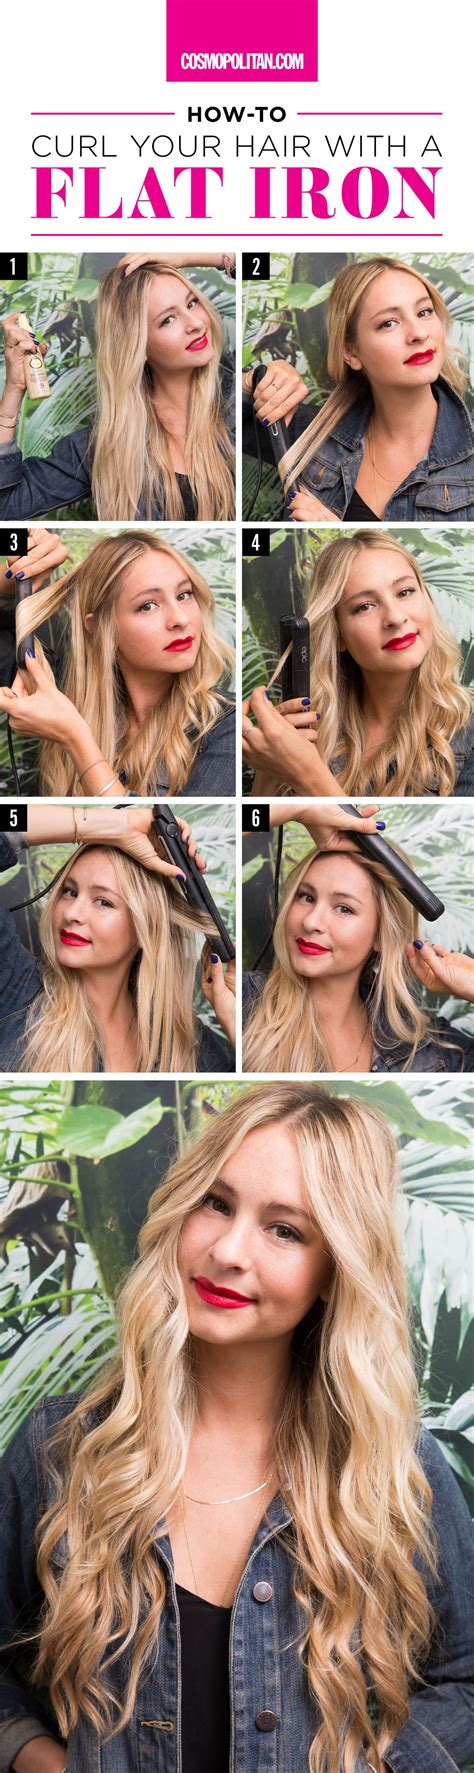 How To Curl Hair With Flat Iron Beach Waves